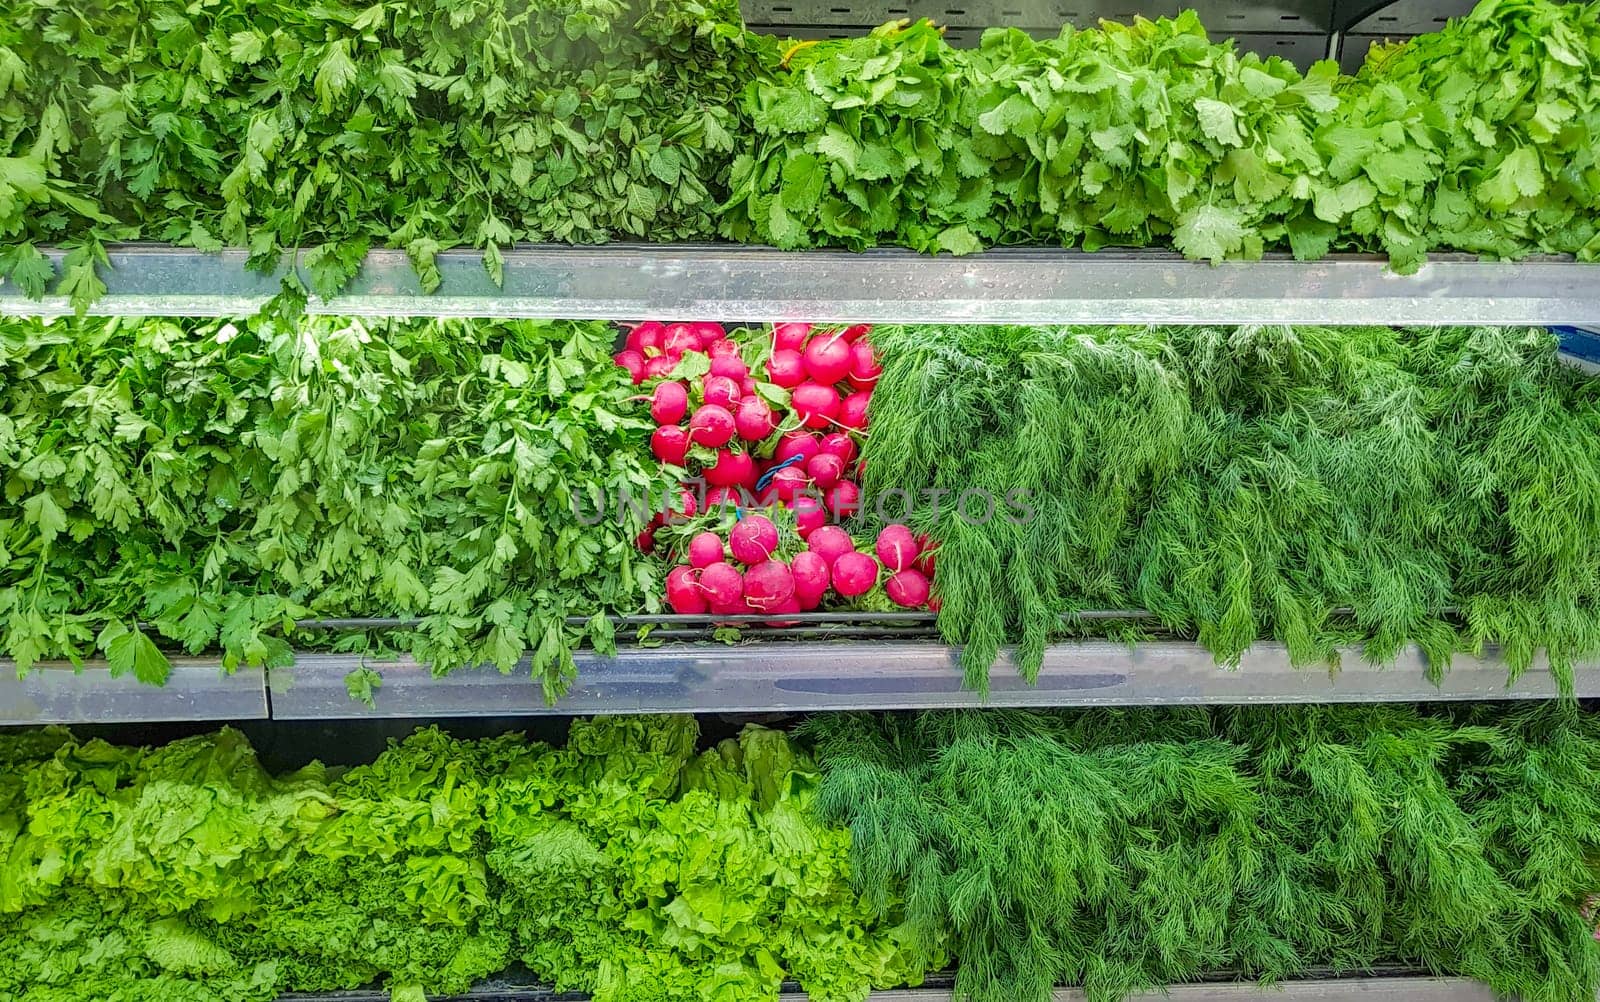 A large selection of fresh herbs and vegetables on the counter. Green dill, red radish, lettuce leaves, curly parsley, mint, fresh basil, zucchini and other products.